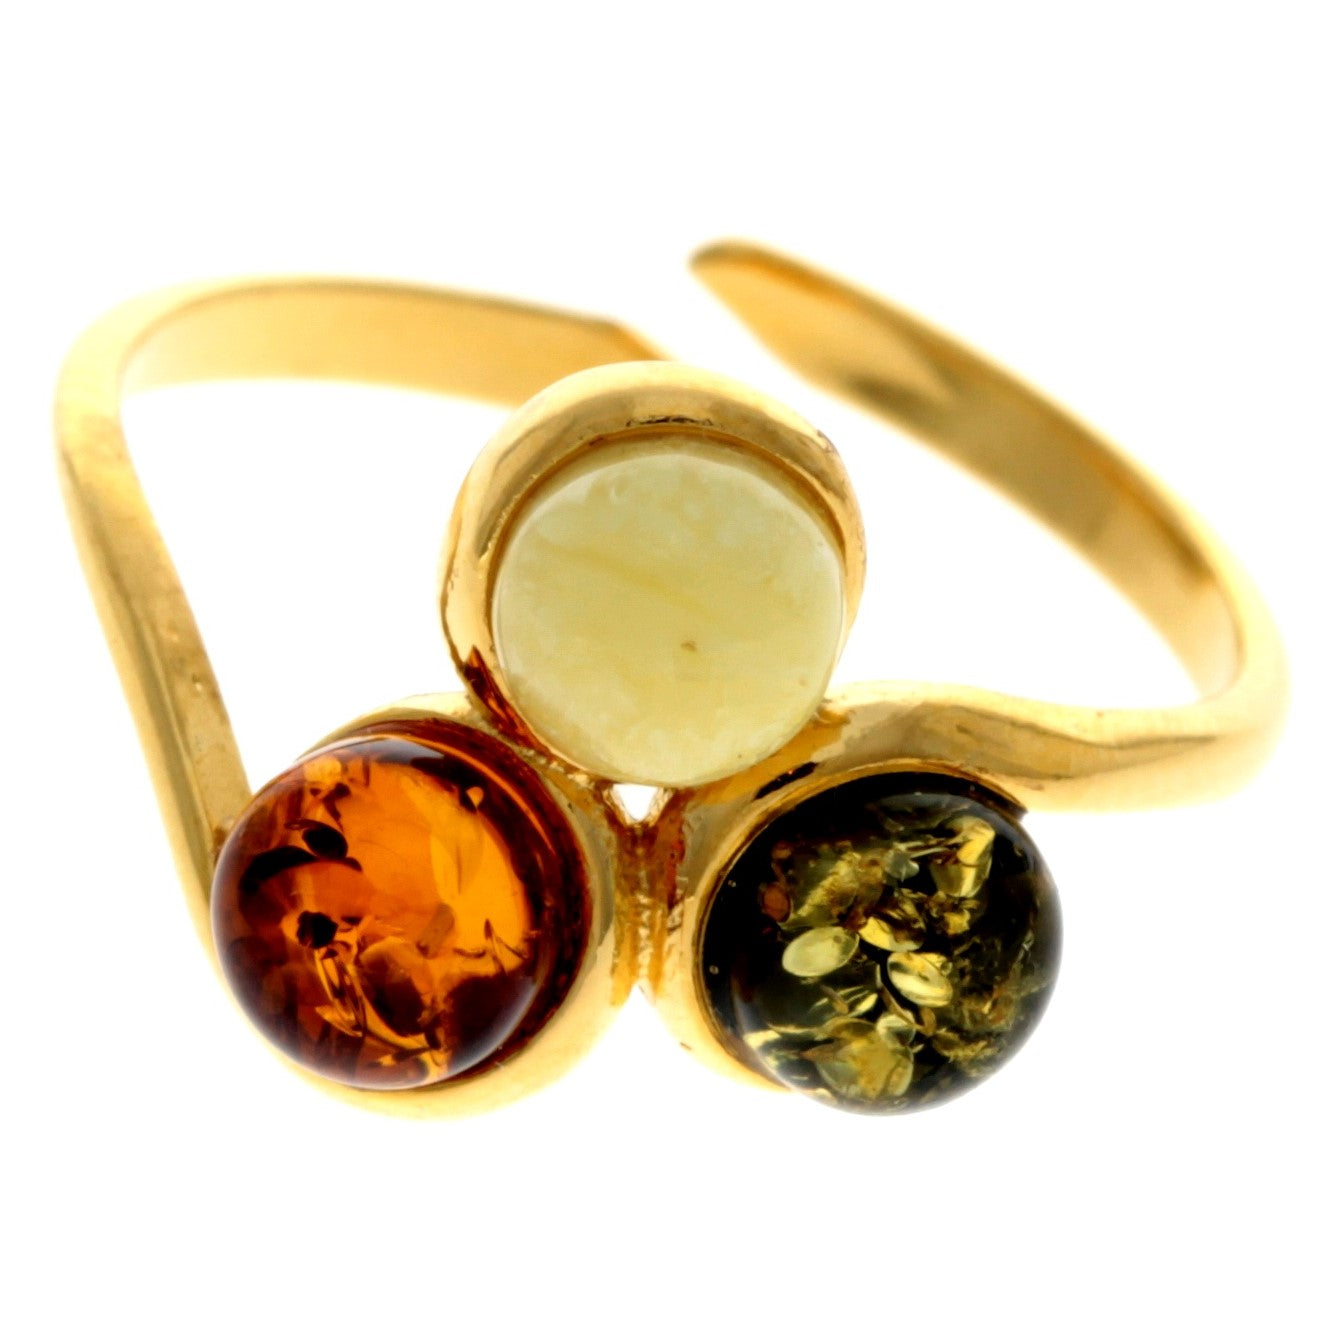 Genuine Baltic Amber and 925 Sterling Silver Gold Plated with 1 micron of 22 Carat Gold Adjustable Ring - MG402